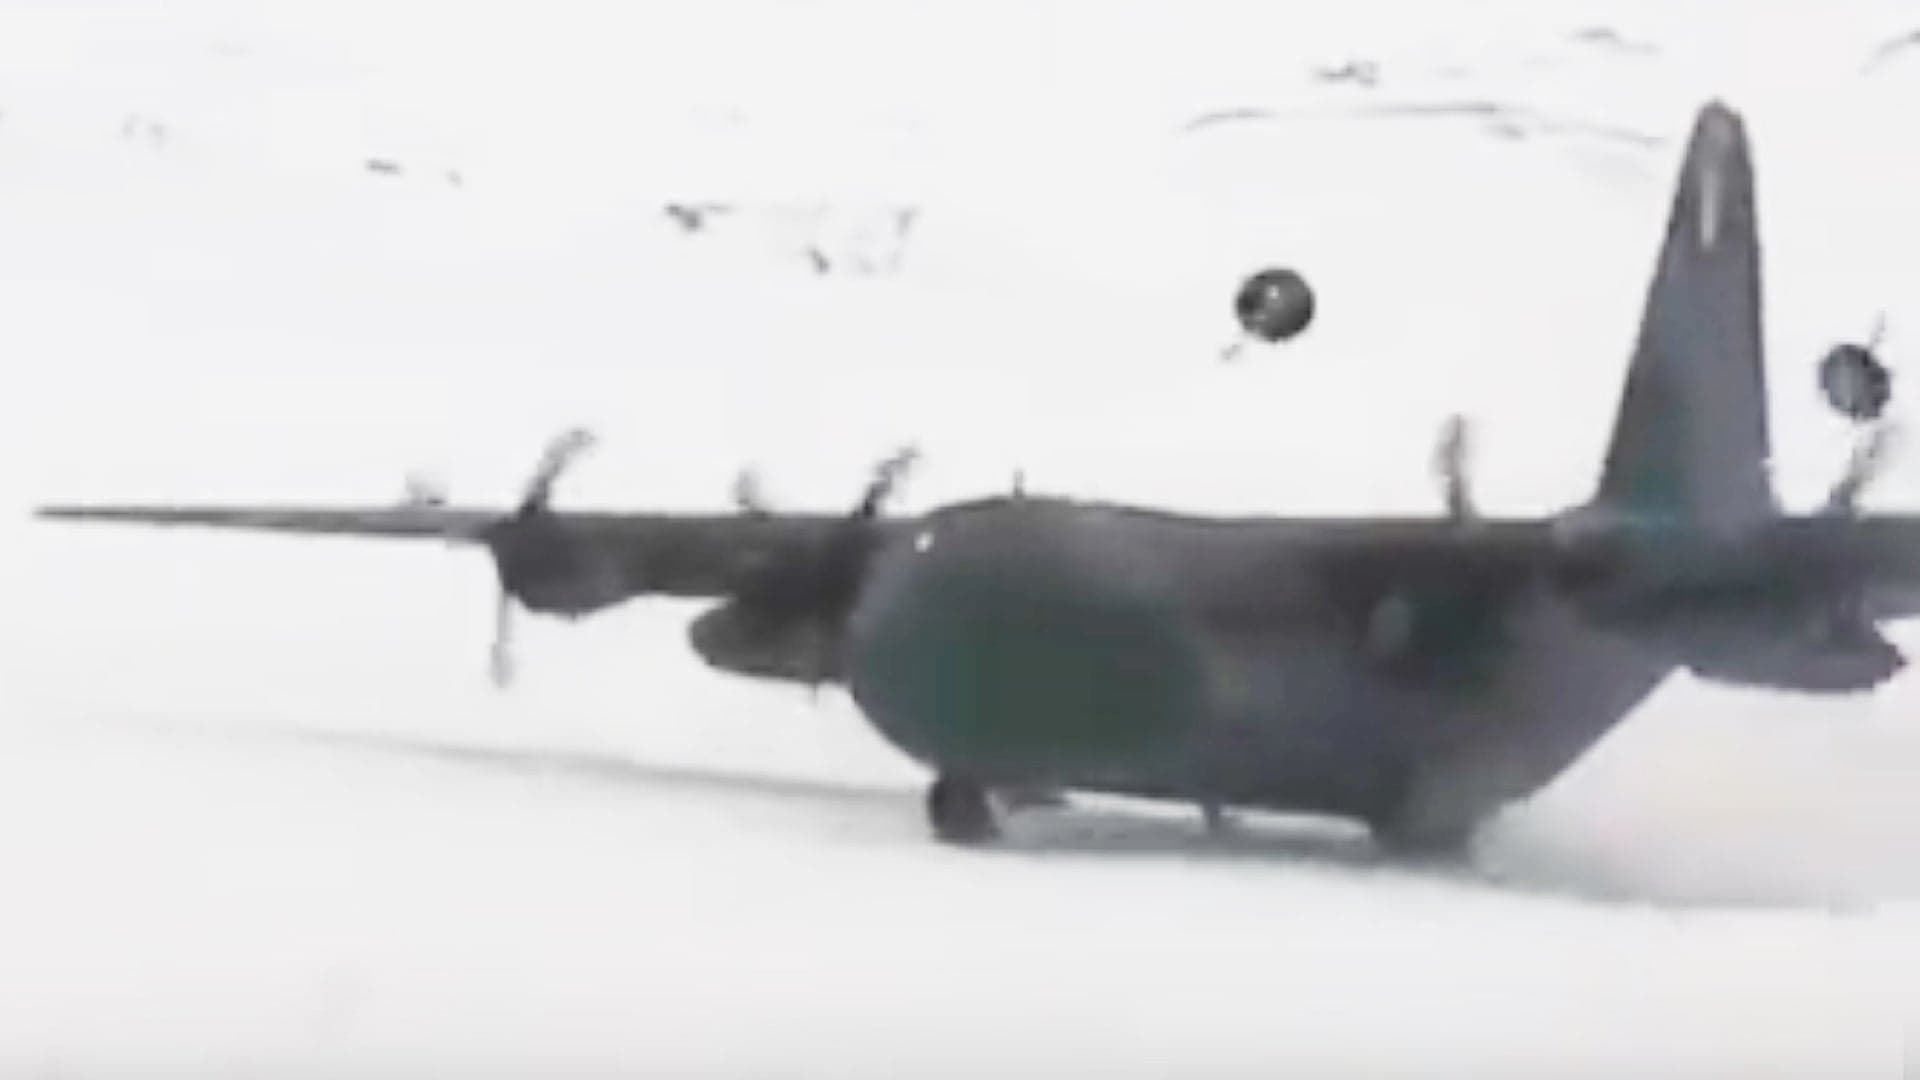 This Video Of A Brazilian C-130 Hercules Crashing In Antarctica Is Nuts